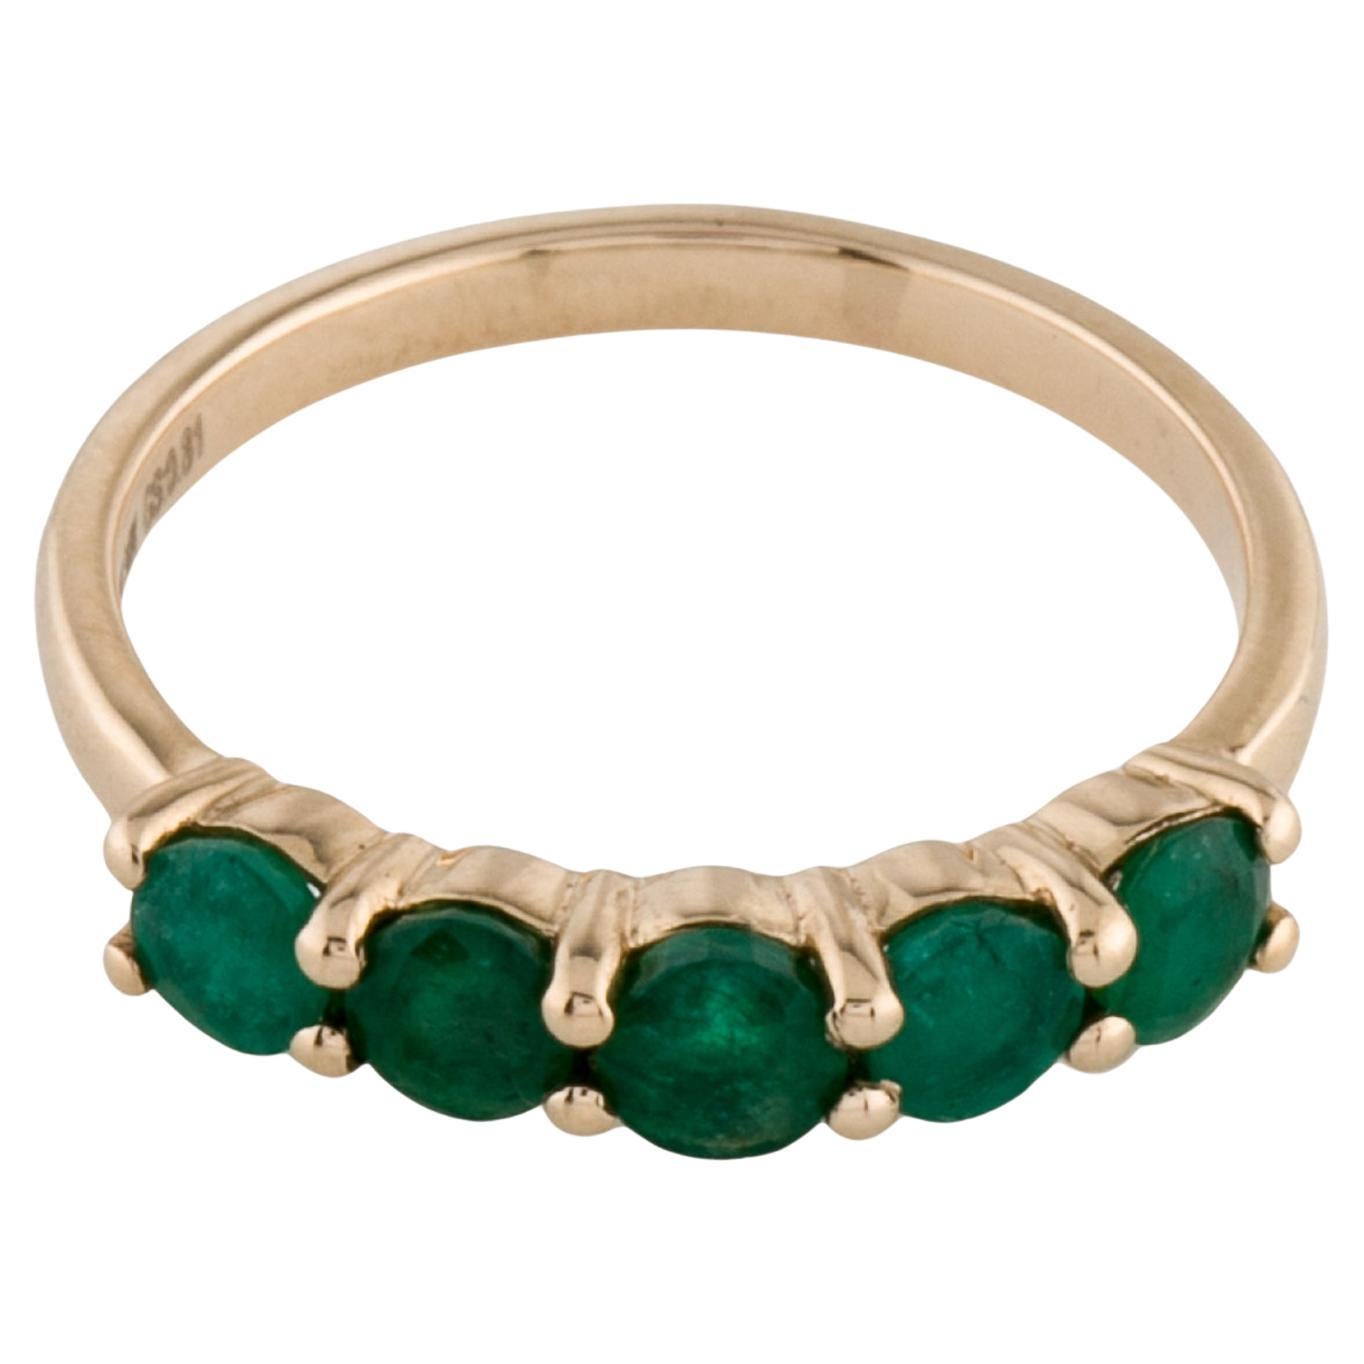 Luxurious 14K Emerald Band Ring  Size 5.75  Stunning Green Gemstone Jewelry For Sale